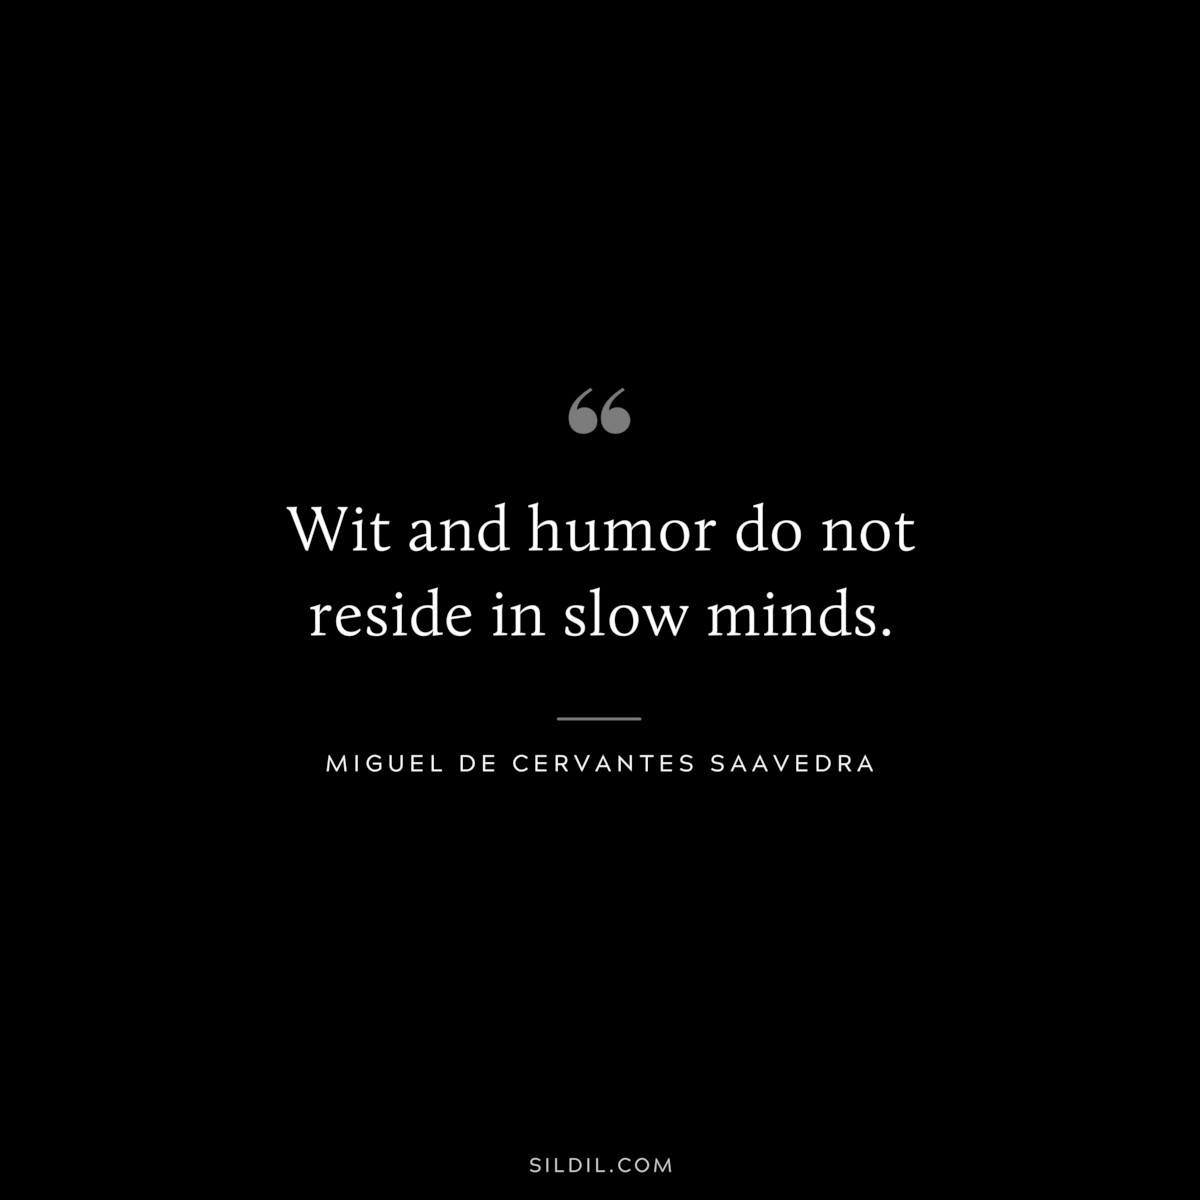 Wit and humor do not reside in slow minds. ― Miguel de Cervantes Saavedra